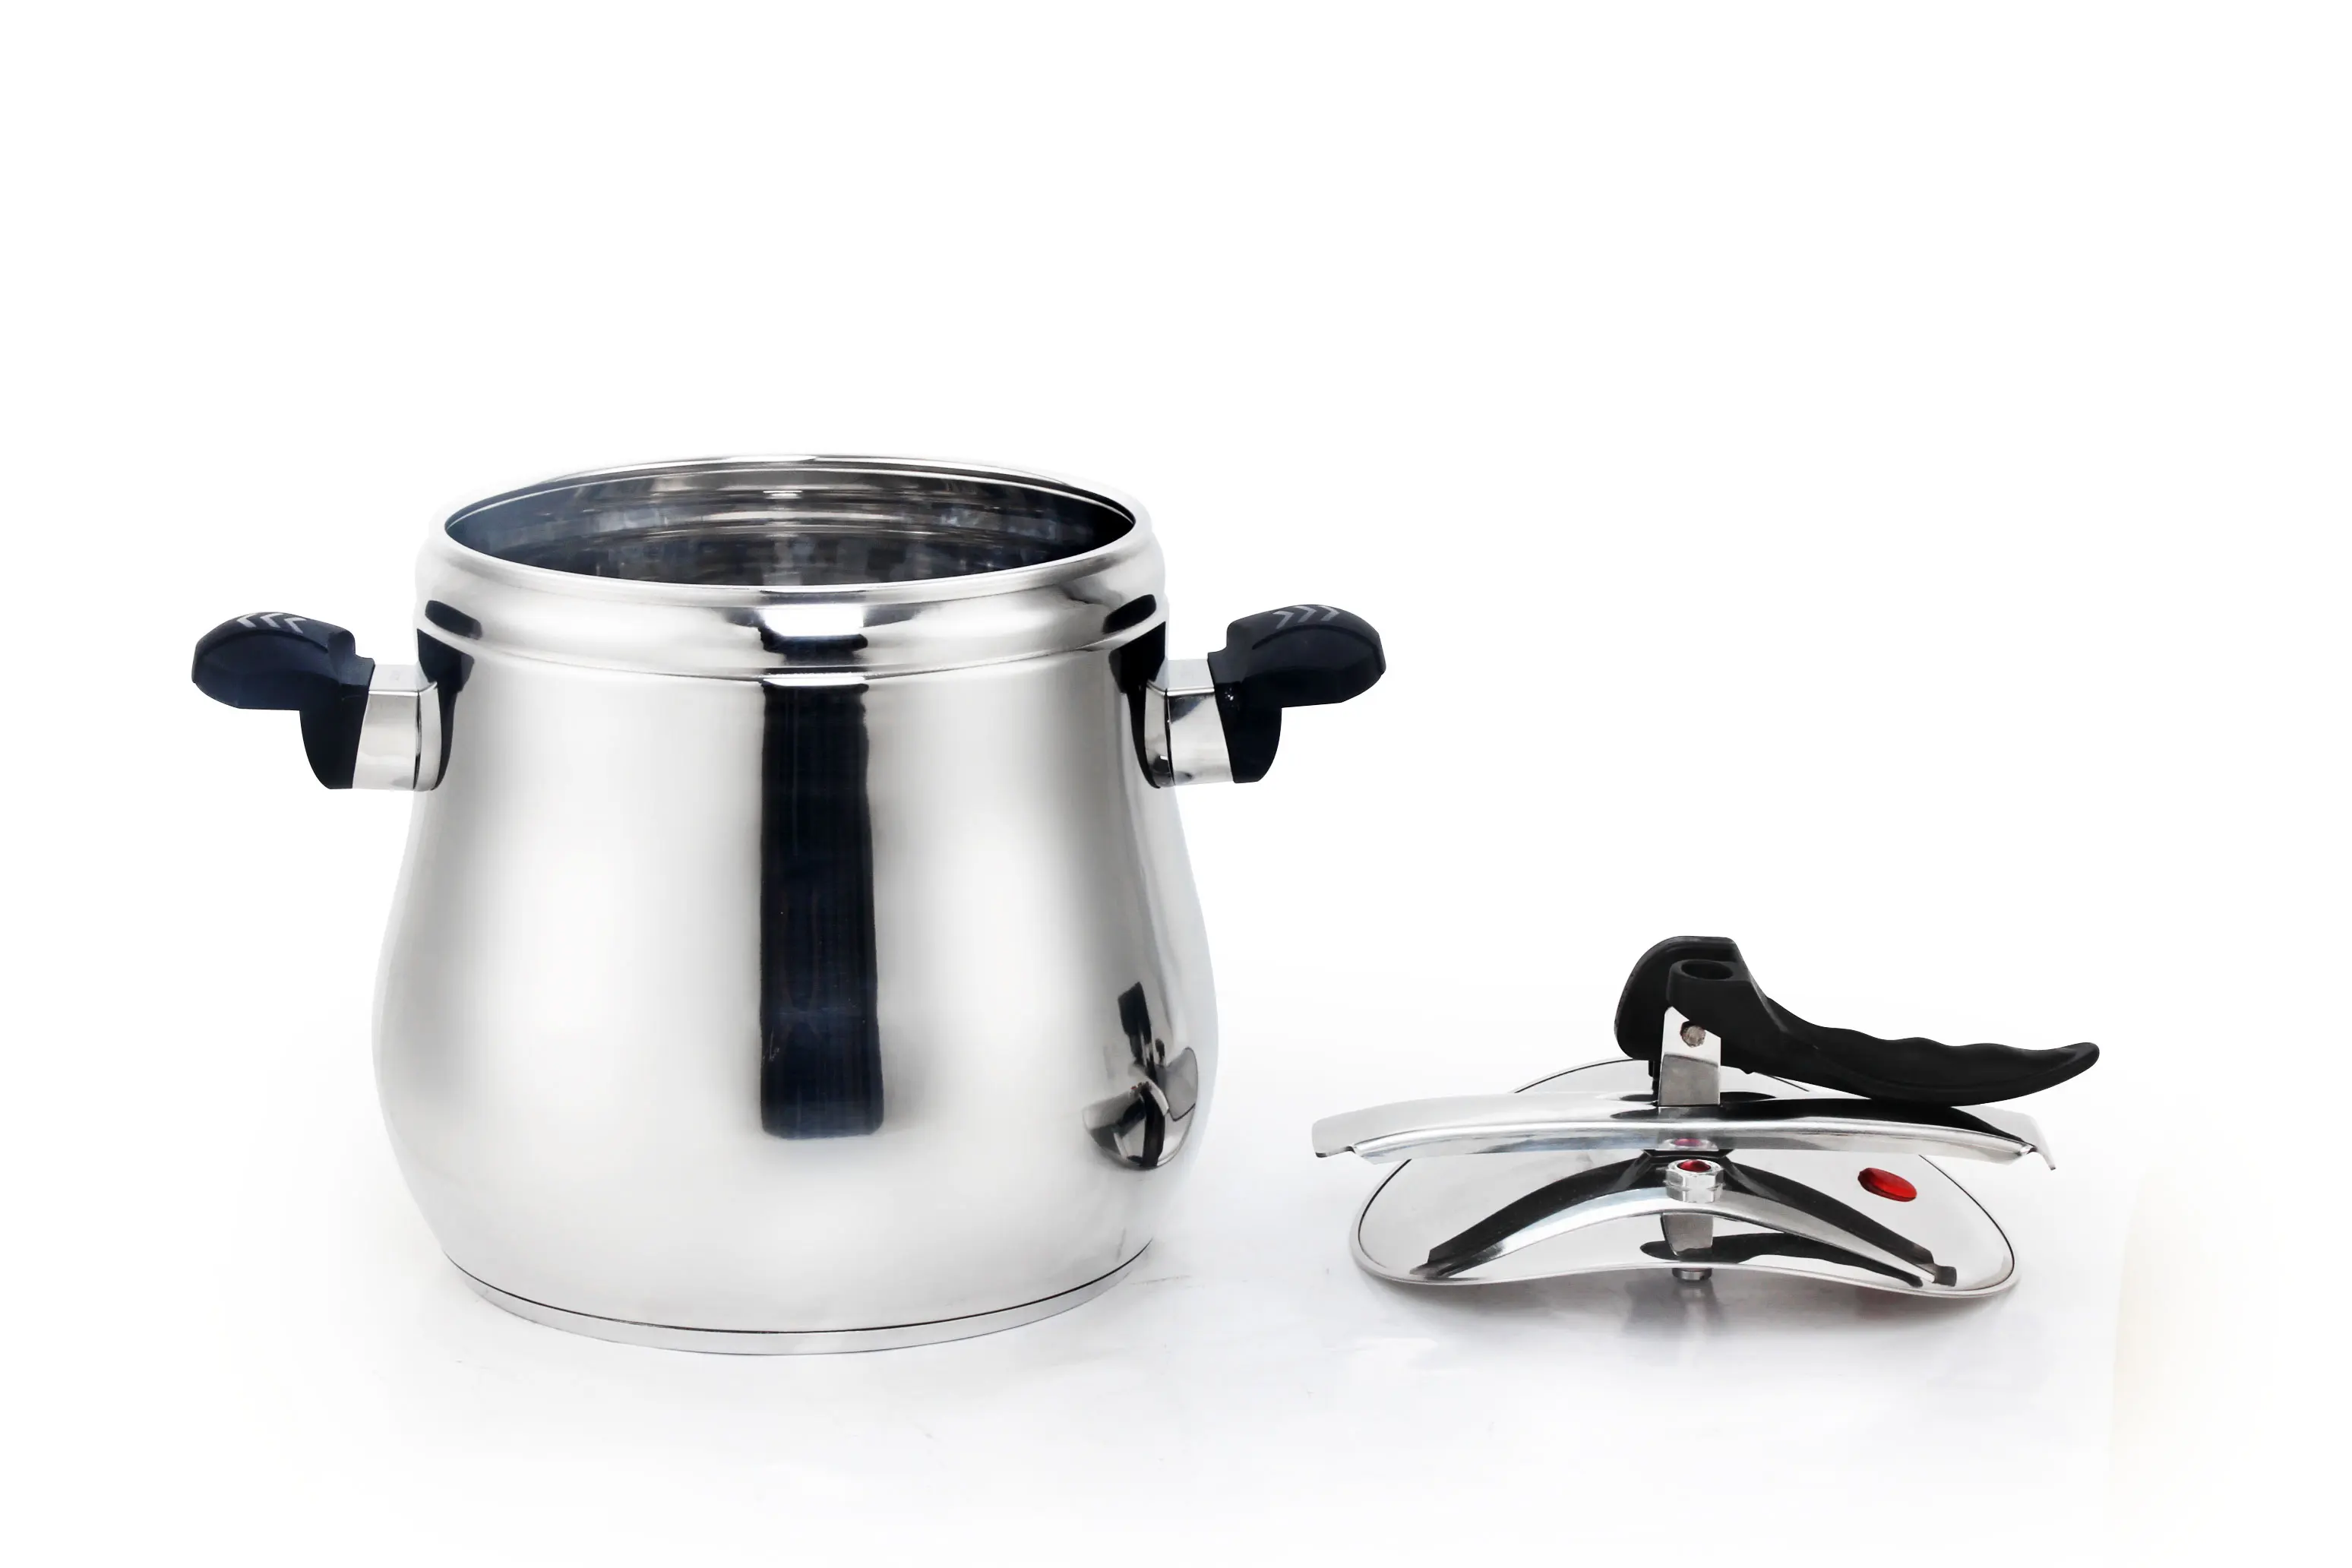 HG high quality 304 stainless steel pressure cooker 304 material LIDL amazon